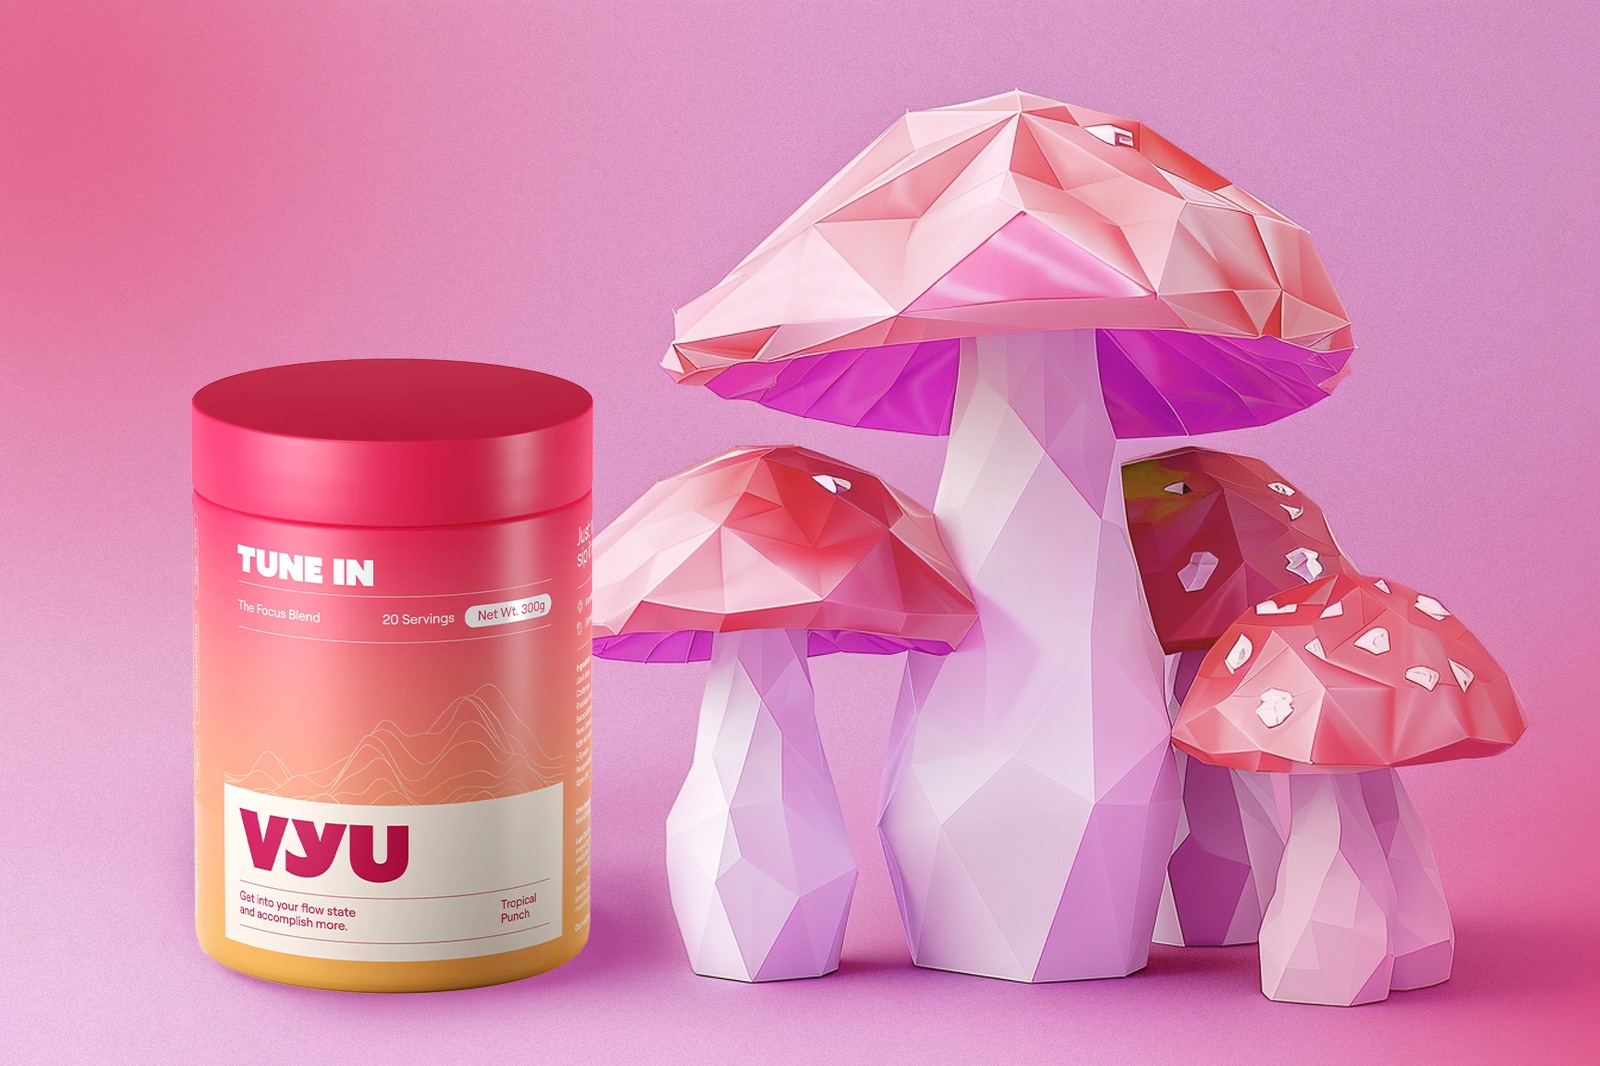 On a pink background, the VYU TUNE IN container featuring Tropical Punch flavor sits alongside pink-colored mushrooms